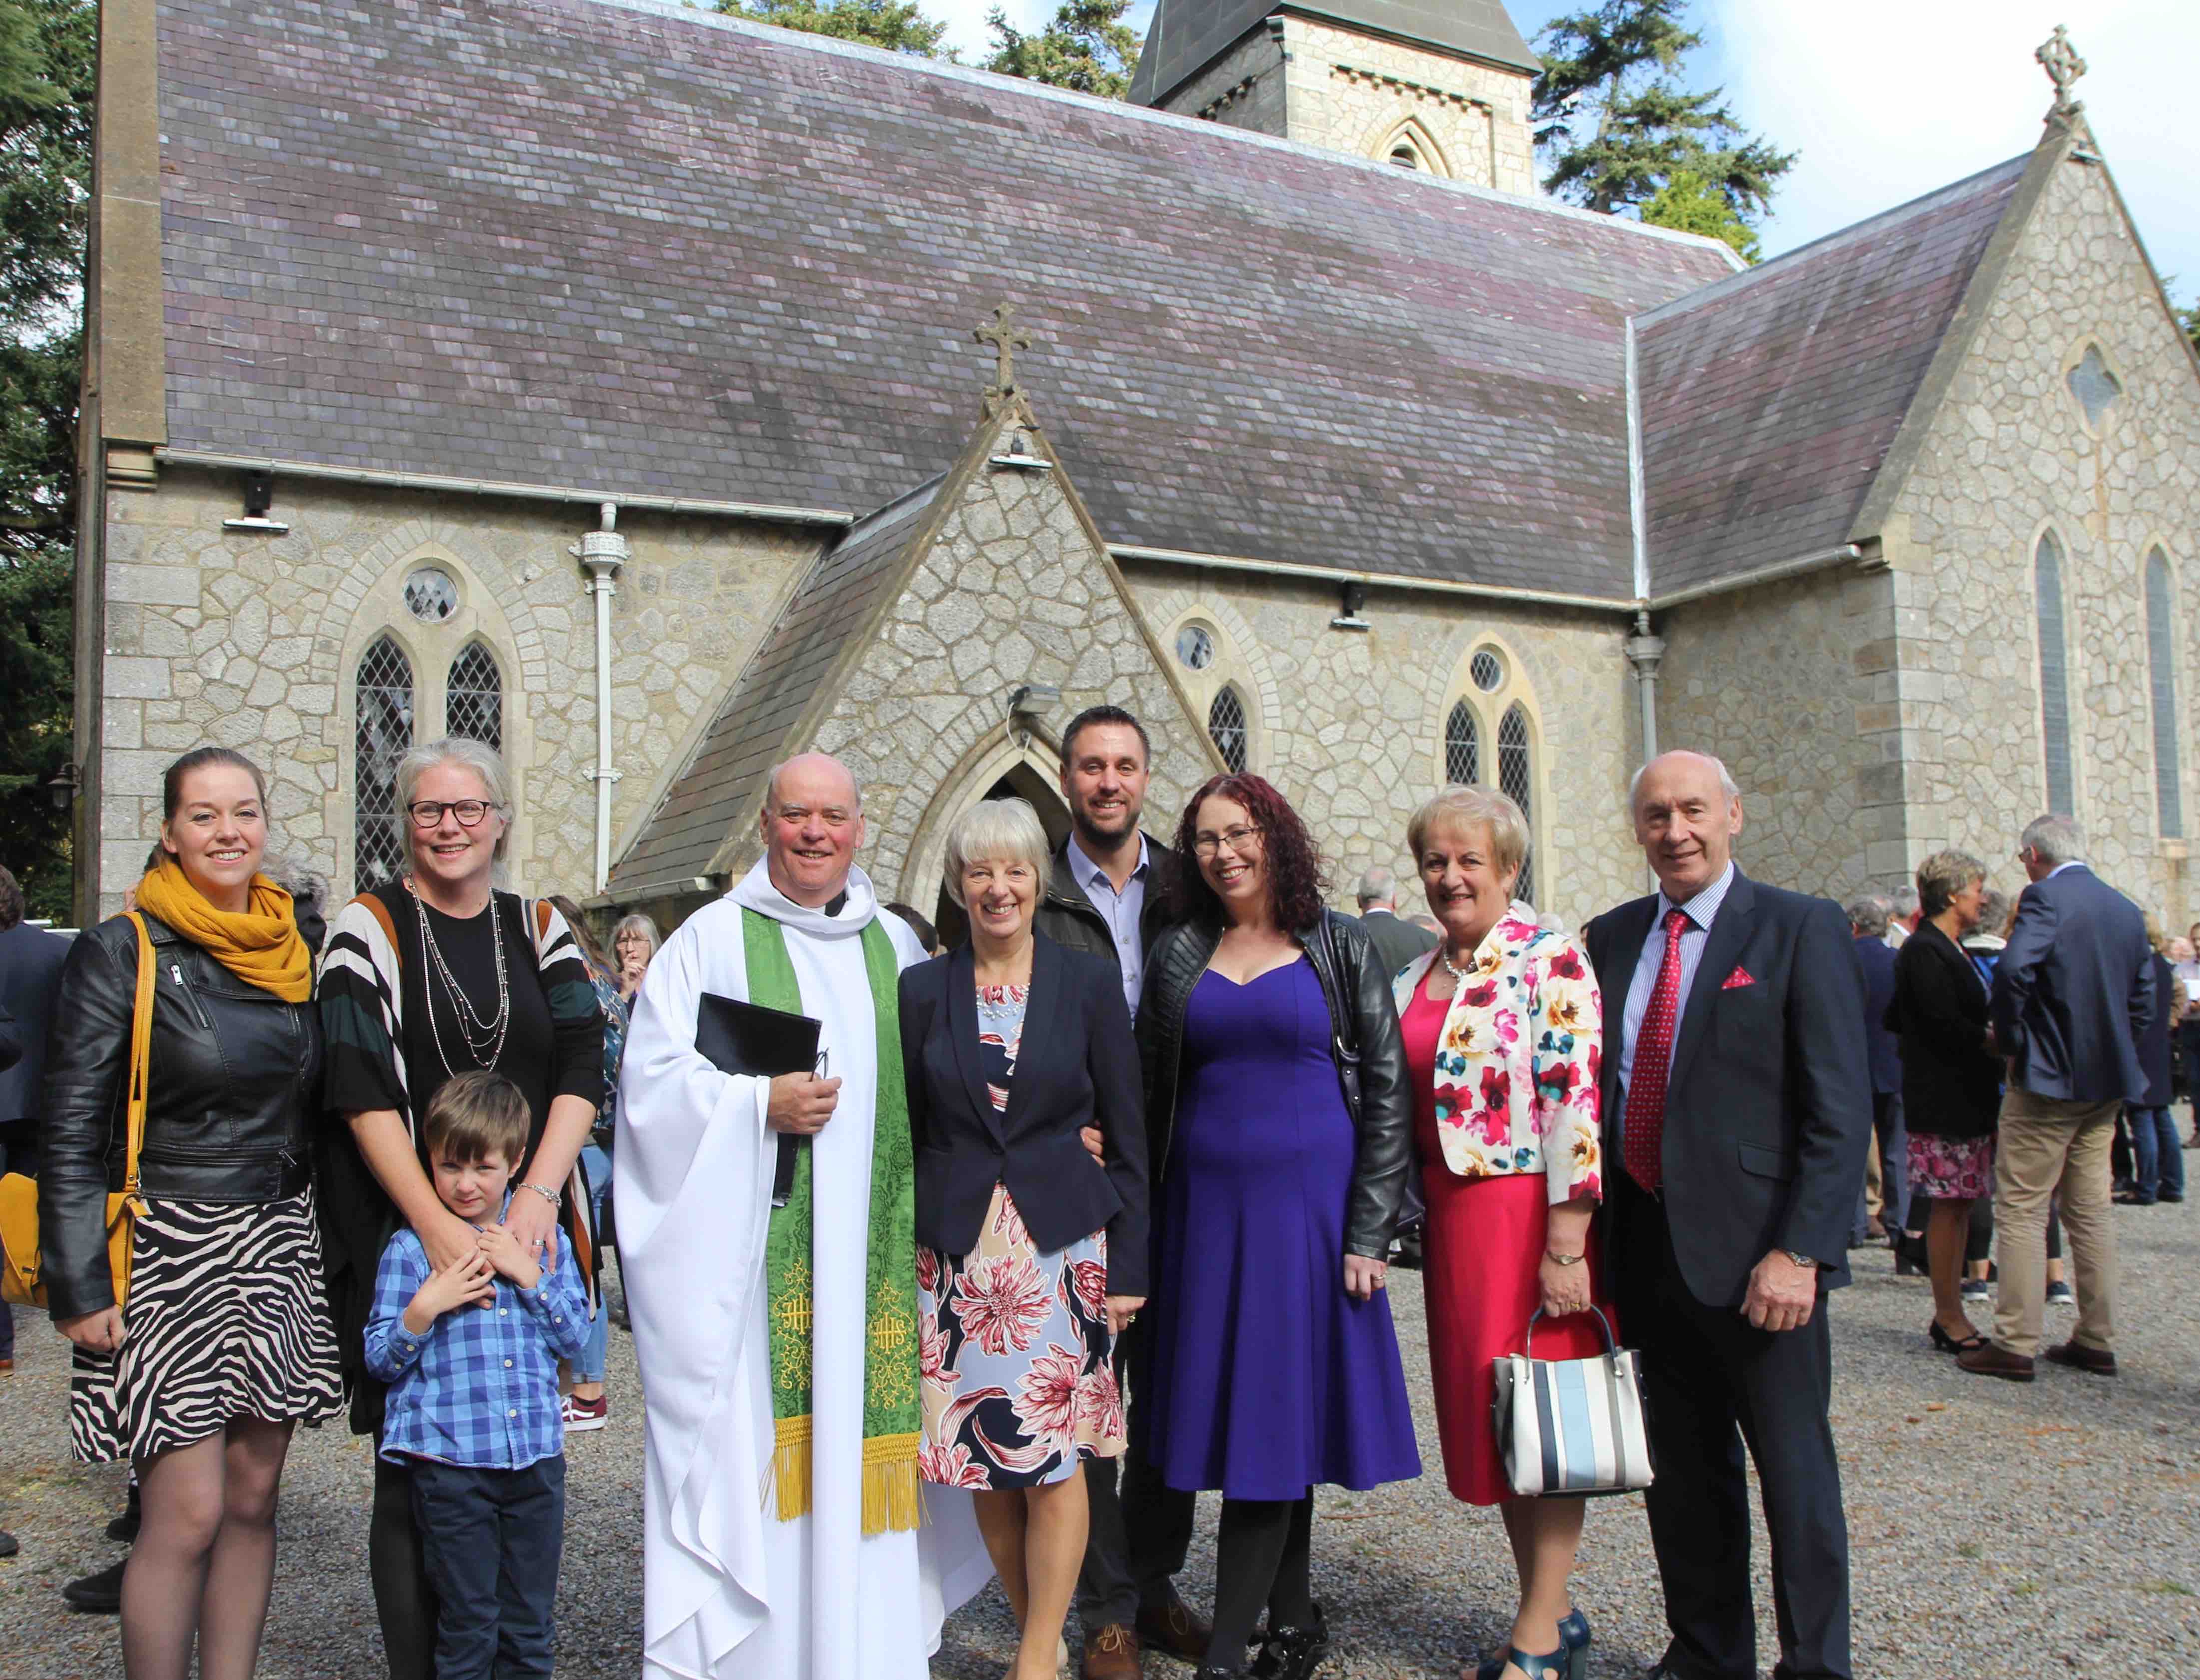 Archdeacon Ricky Rountree with his wife and family - Vivienne Rountree, Beth and Jake Stack, Archdeacon Ricky Rountree, Elizabeth Rountree, Lindsay and Mary Neylon, Meta Kinnear and Lester Kinnear.